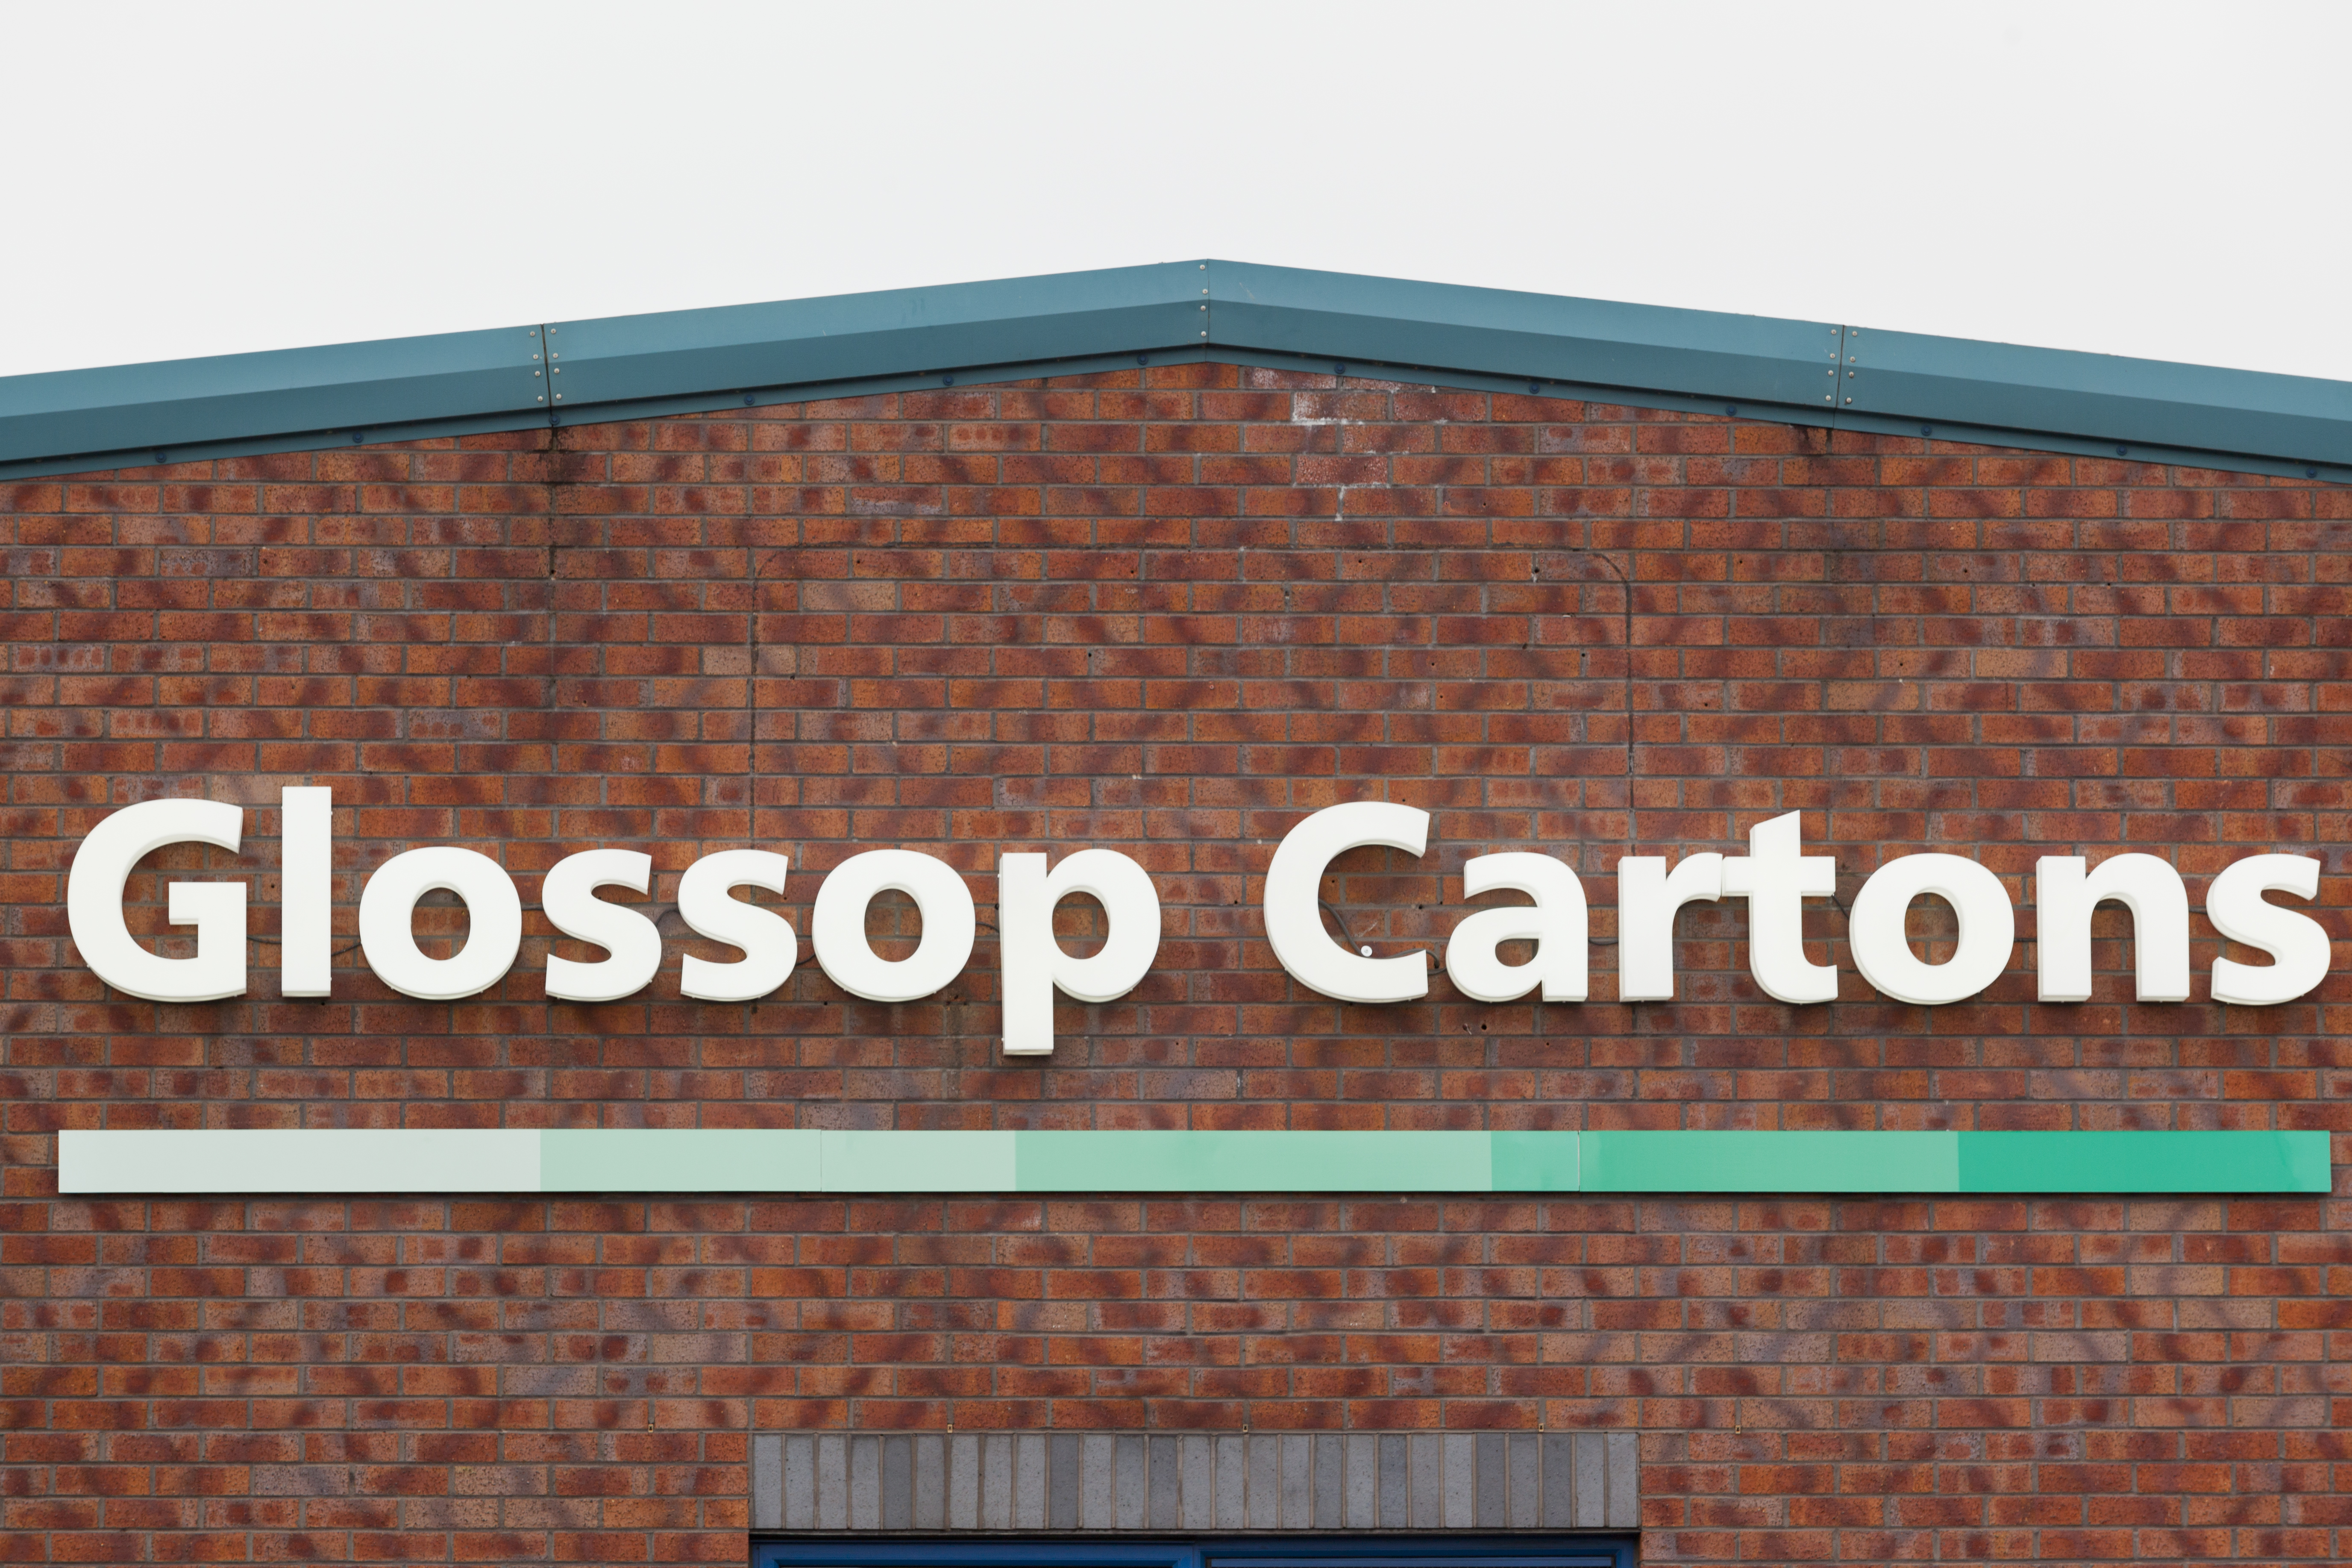 50% expansion for Glossop Cartons